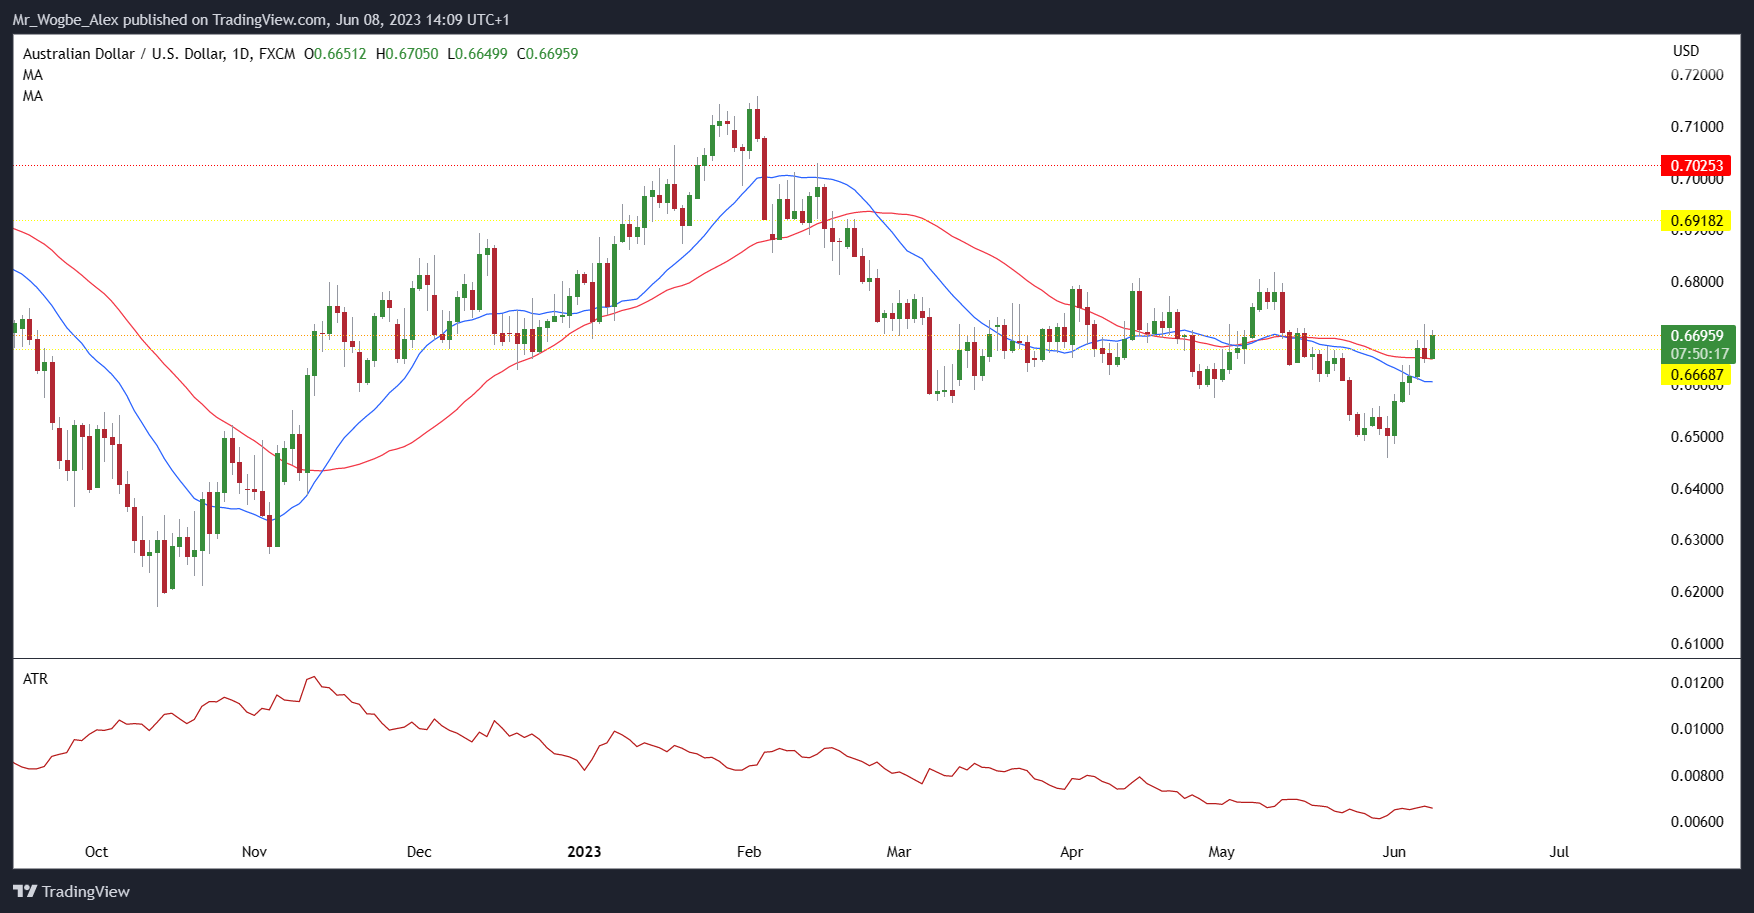 AUD/USD daily chart on TradingView